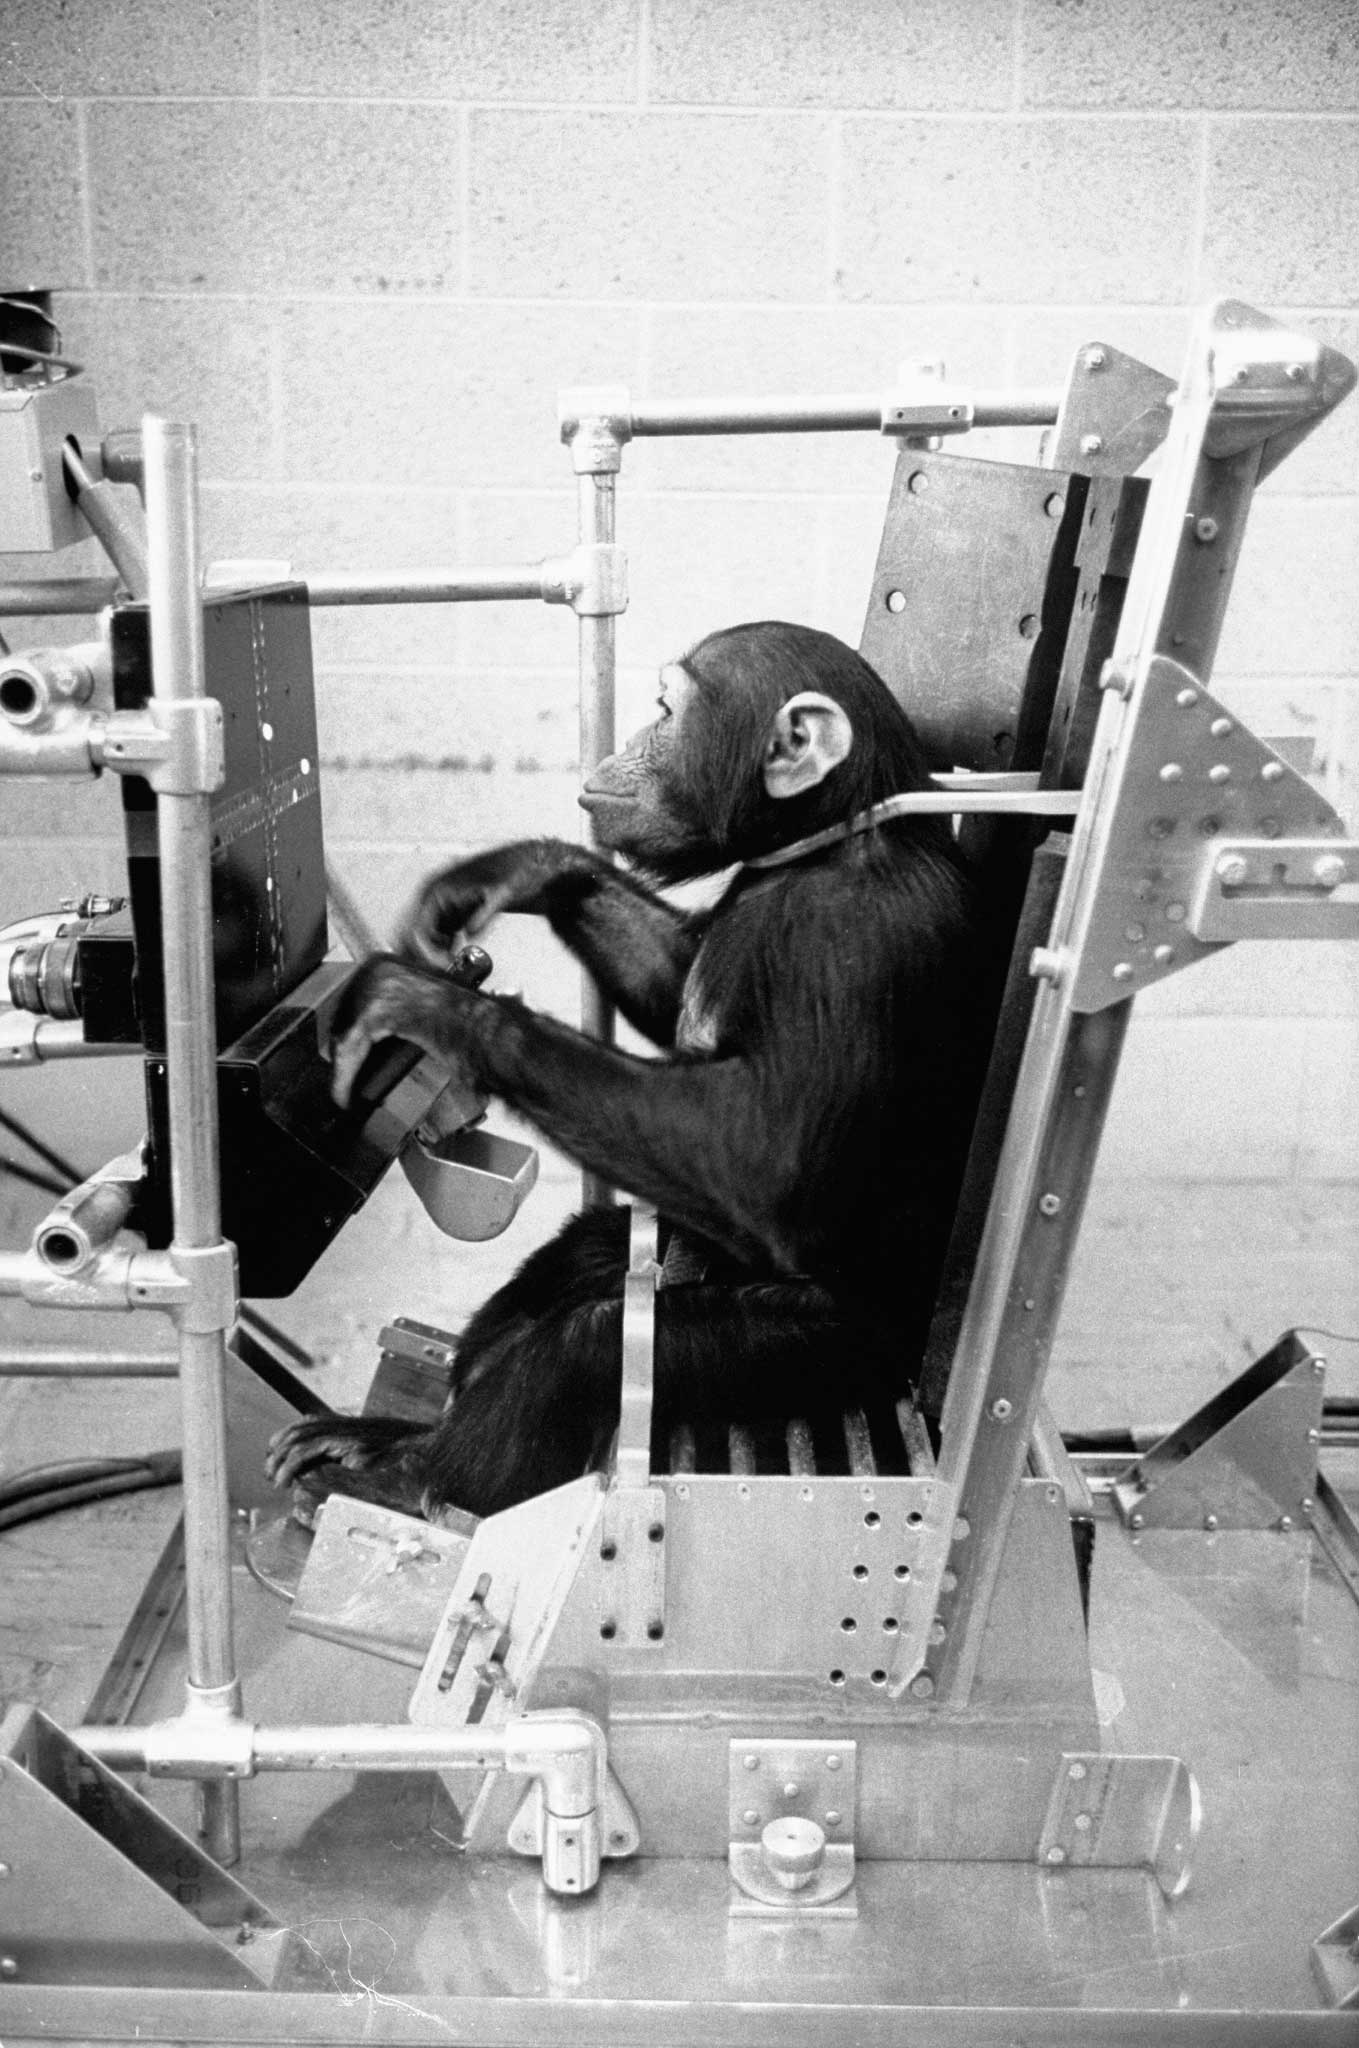 LIFE With the Astrochimps: Early Stars of the Space Race